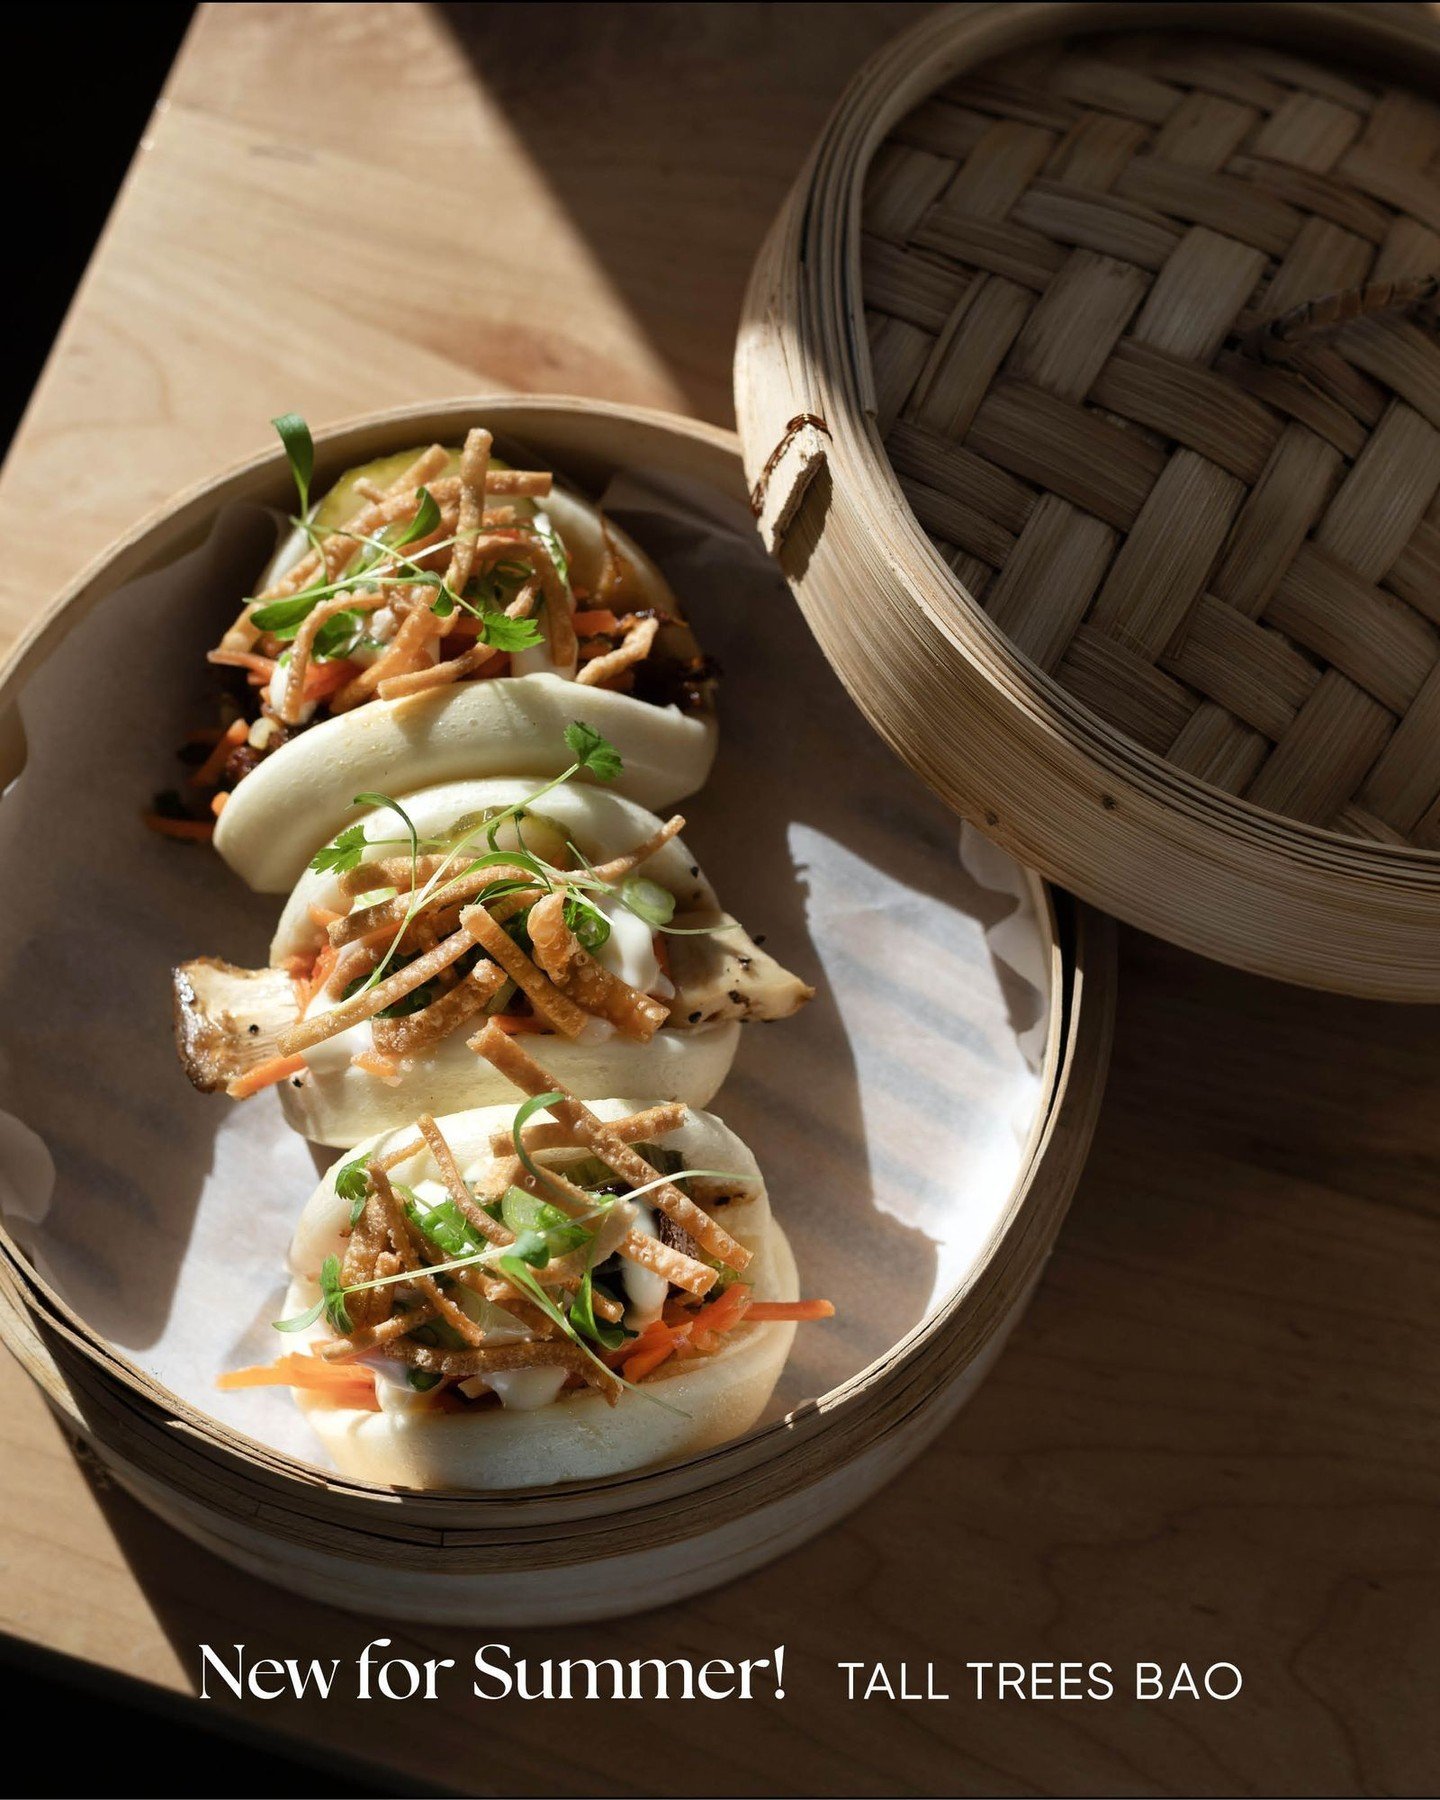 We love bao so much that we&rsquo;ve added three Tall Trees Bao options to our Lunch Menu and a bao appetizer to our Dinner Menu!

What are bao, you ask? Bao (pronounced like the bow of a boat) are soft, pillowy buns with various fillings that make t